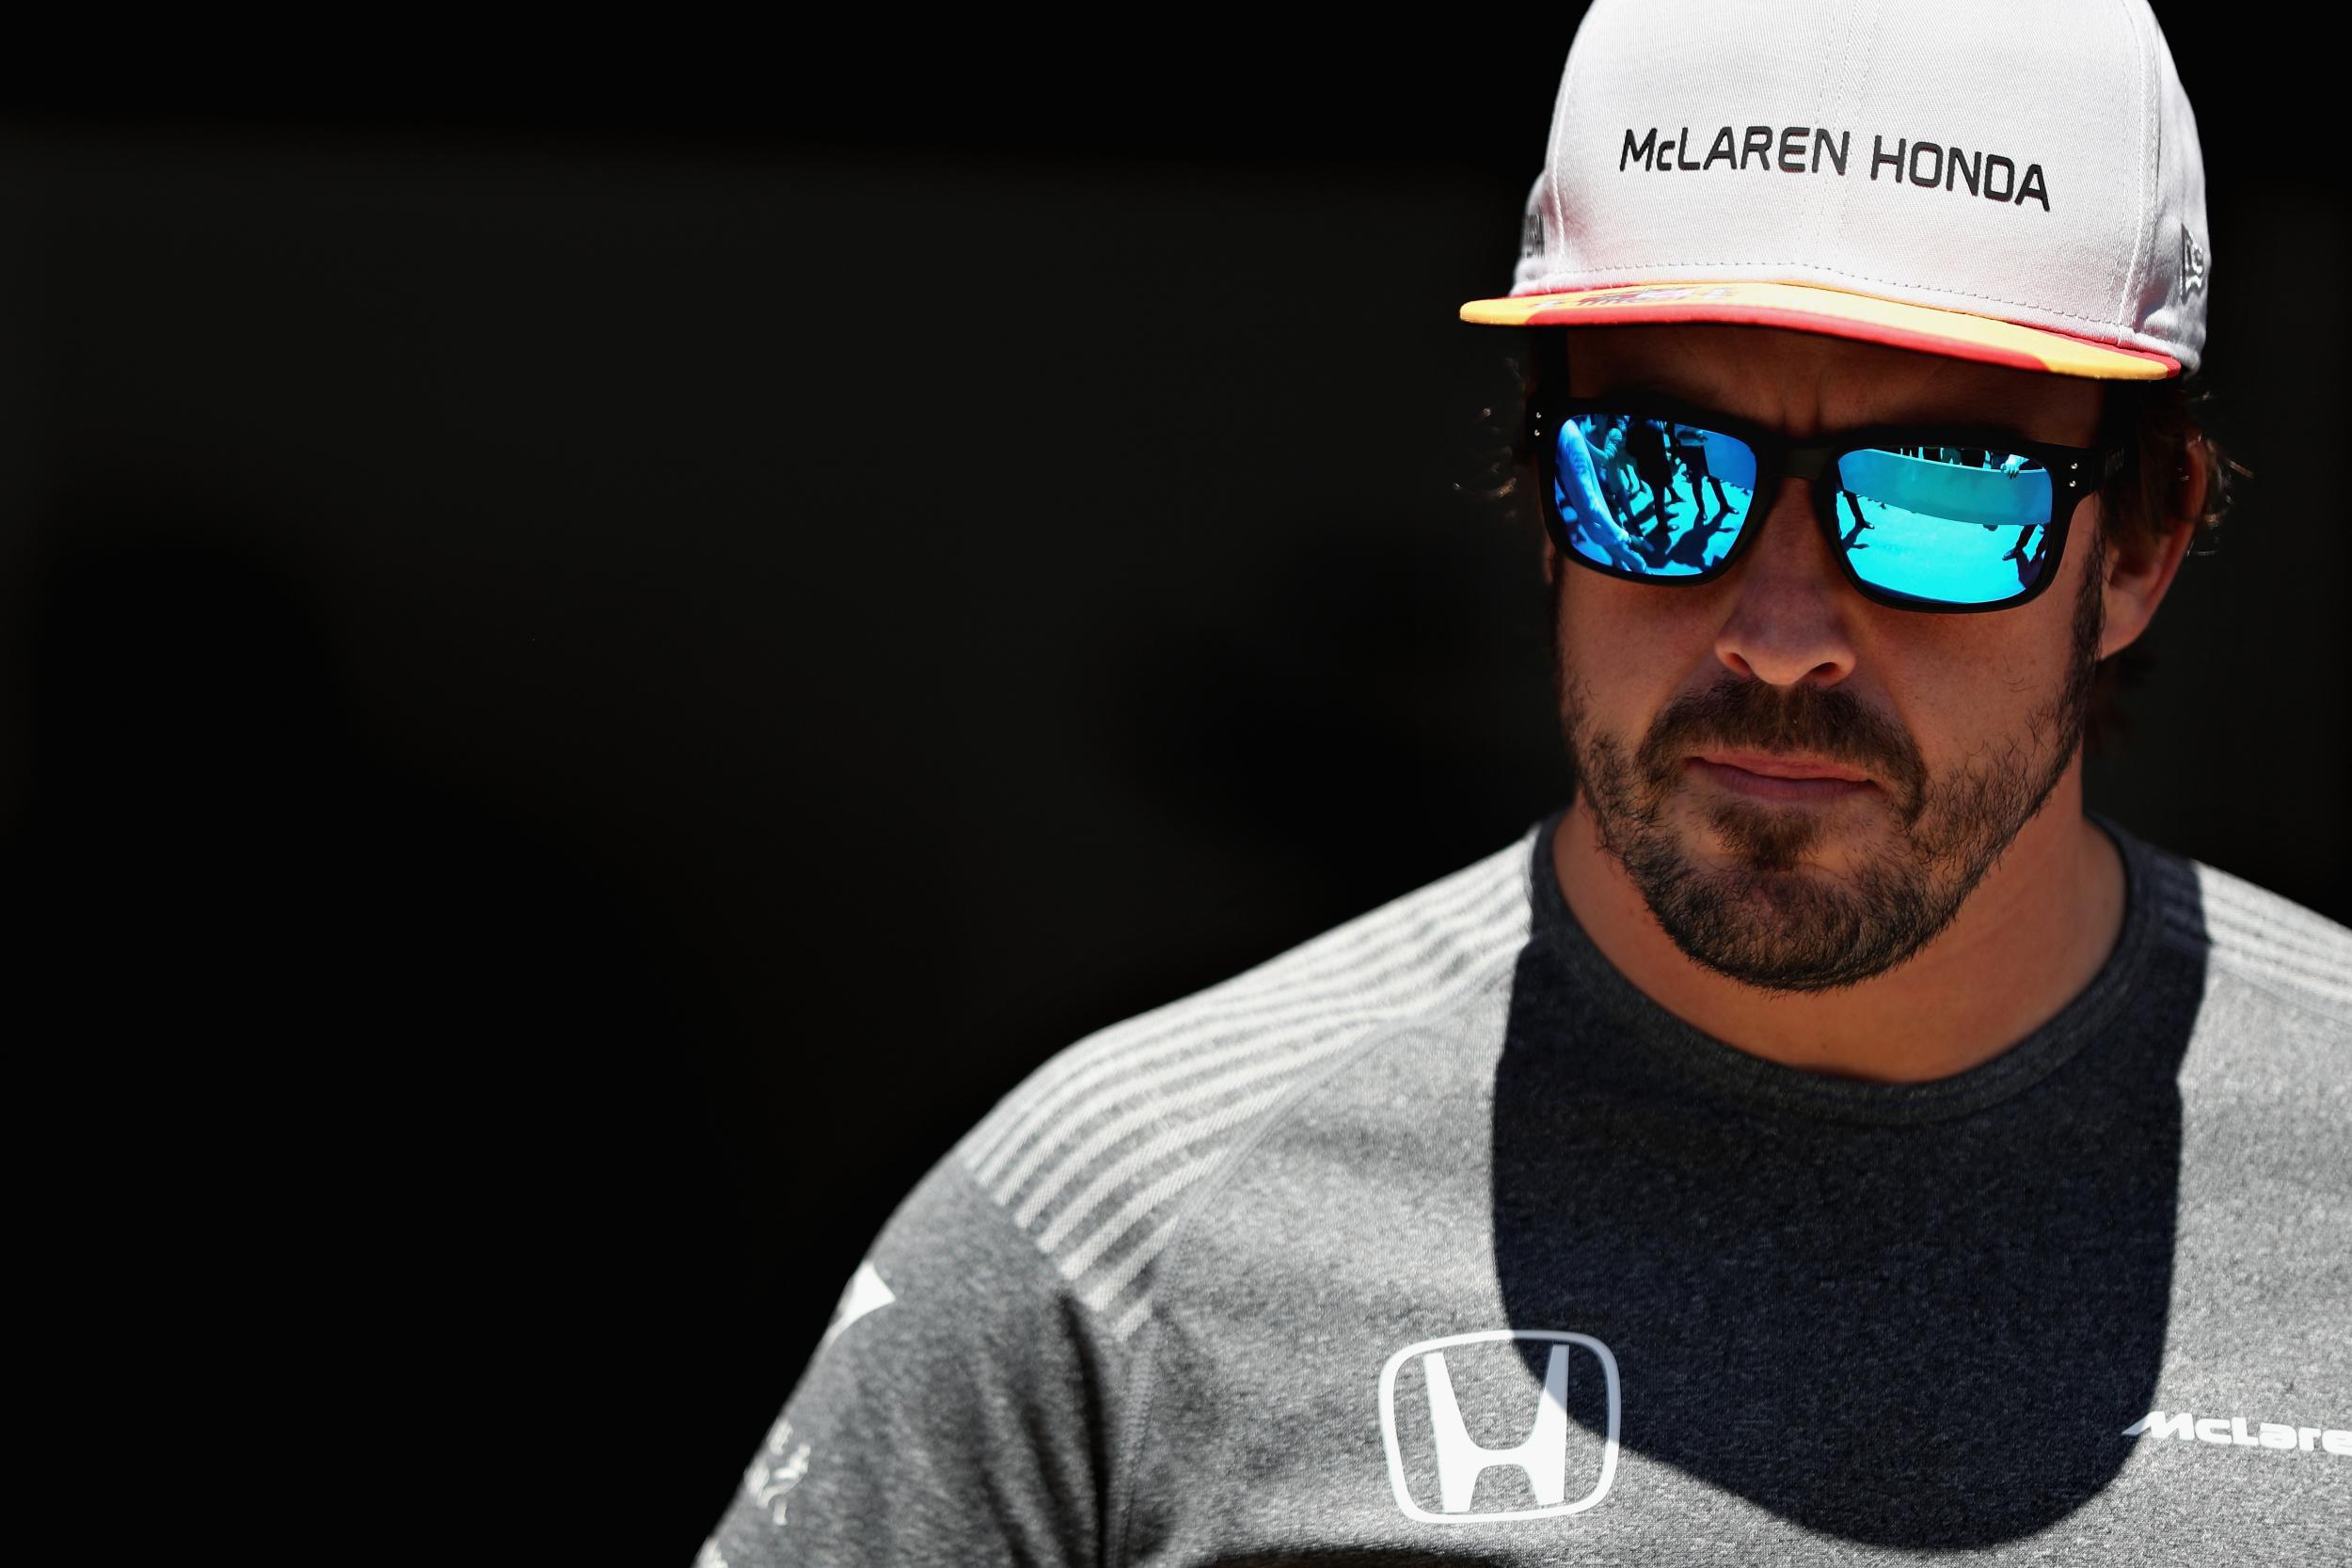 Alonso has so far completed three practice sessions ahead of the Indy 500